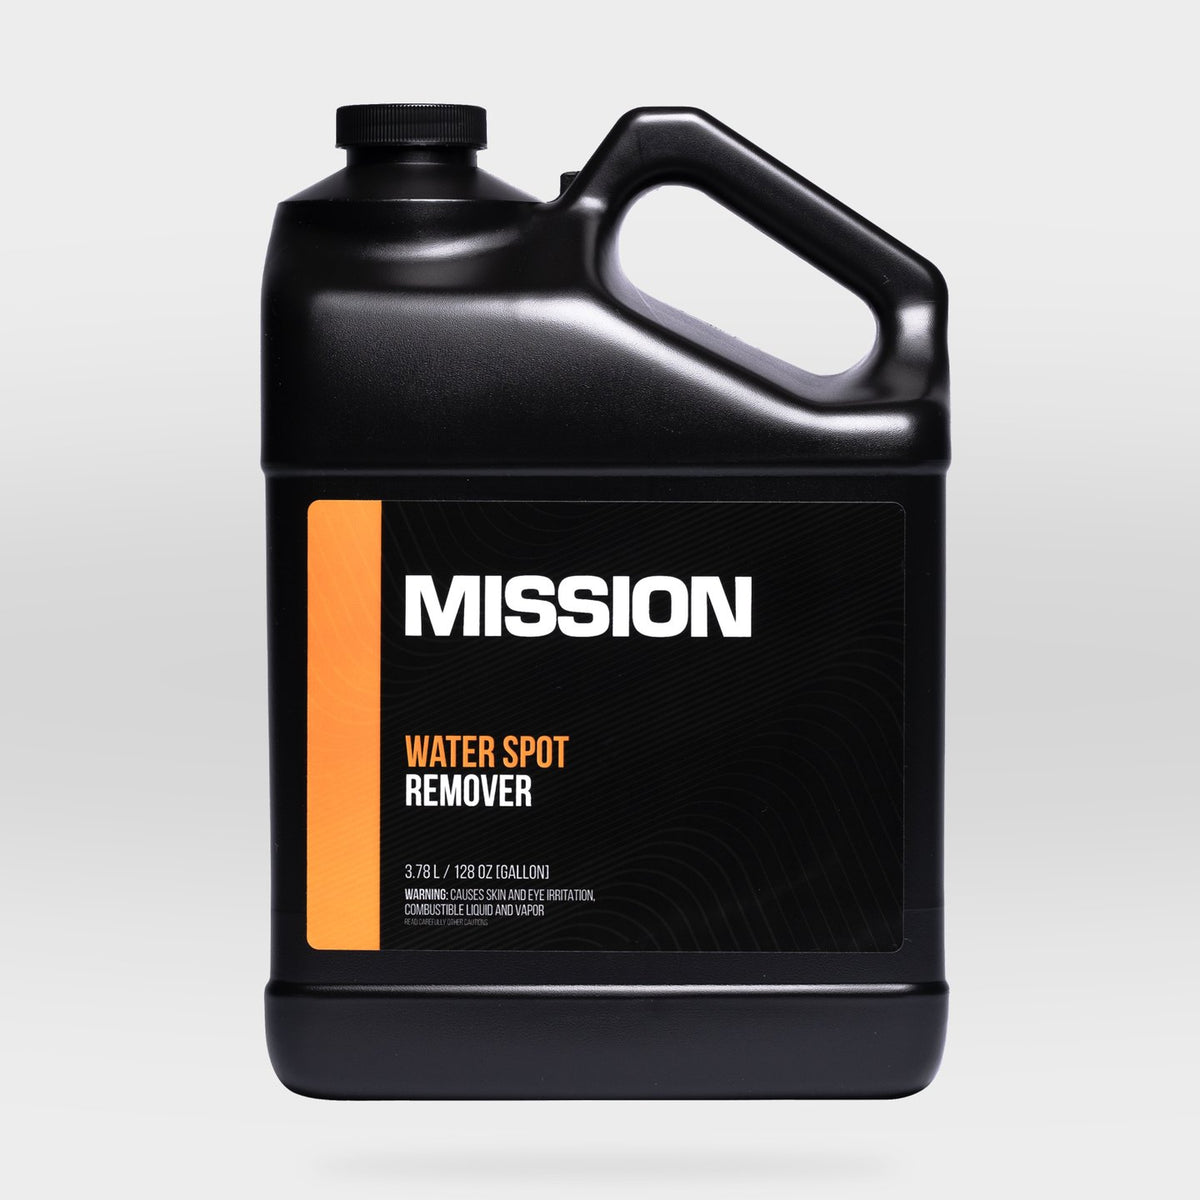 Mission Water Spot Remover